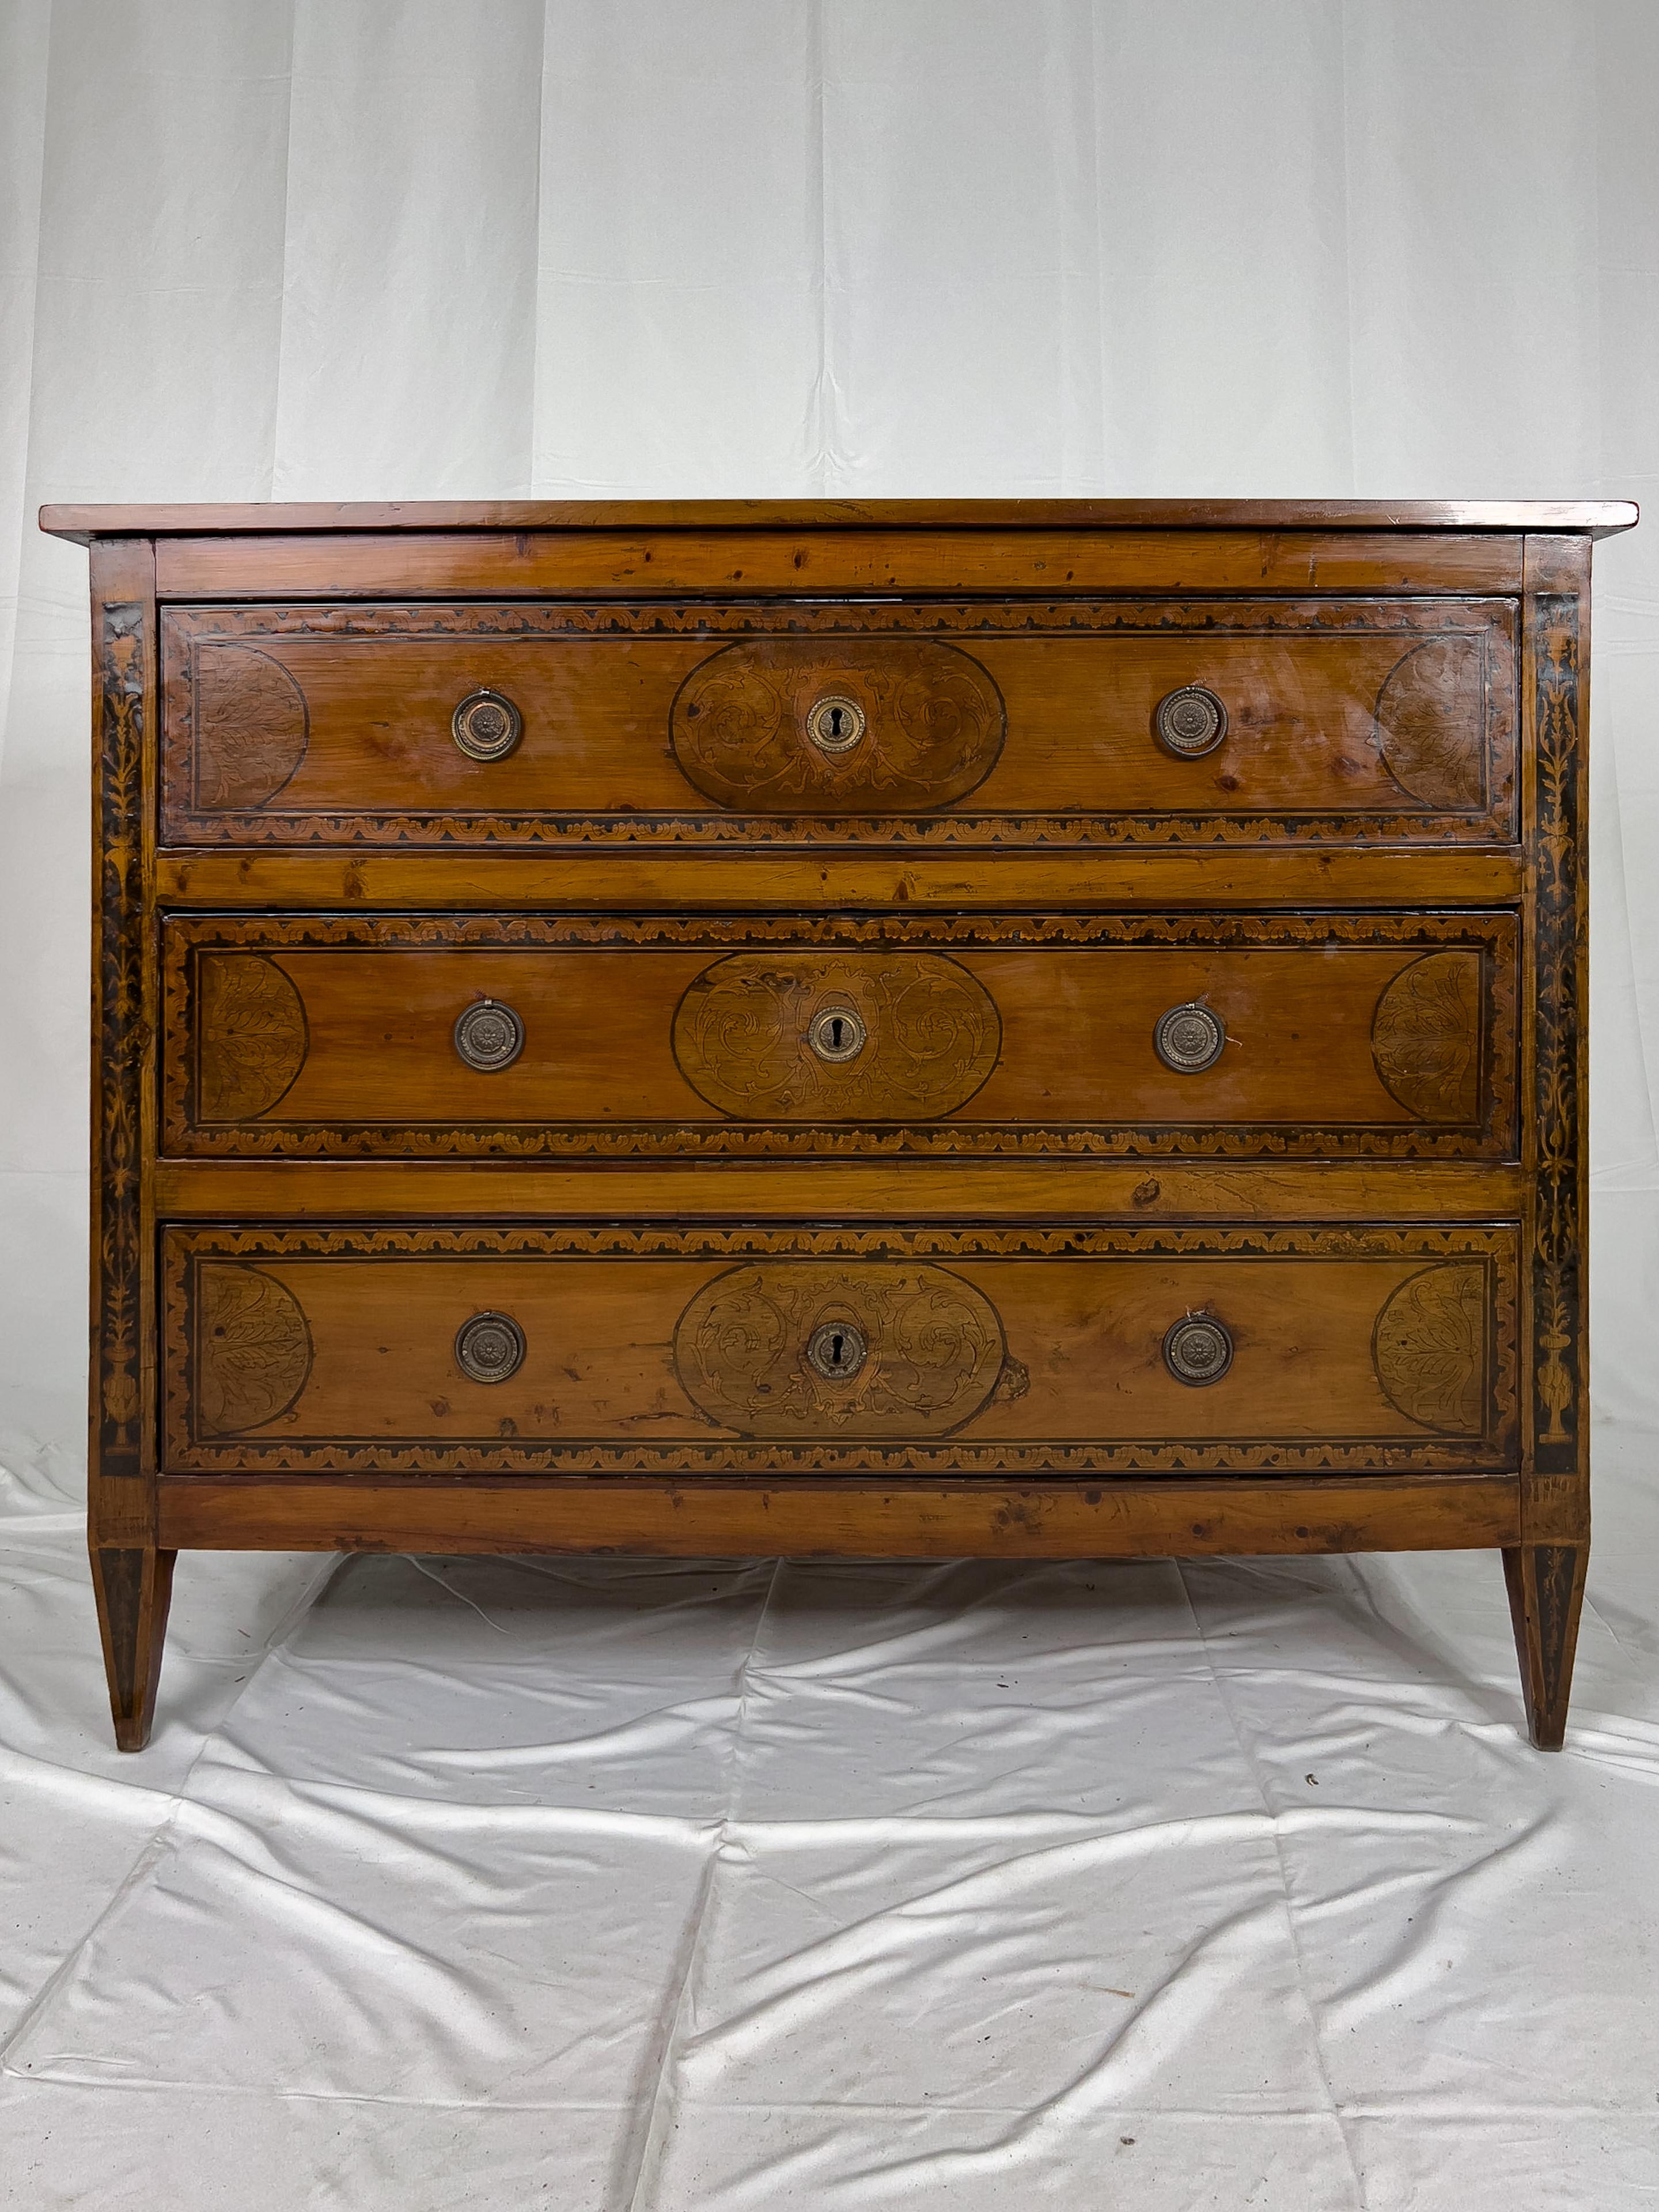 18th century 3 drawer fruitwood Italian commode with walnut inlay on the top, front, legs and sides of the piece. The inlay depicts urns in the medallions and foliate designs in the corners. Every surface of the commode has a rich patina. This piece